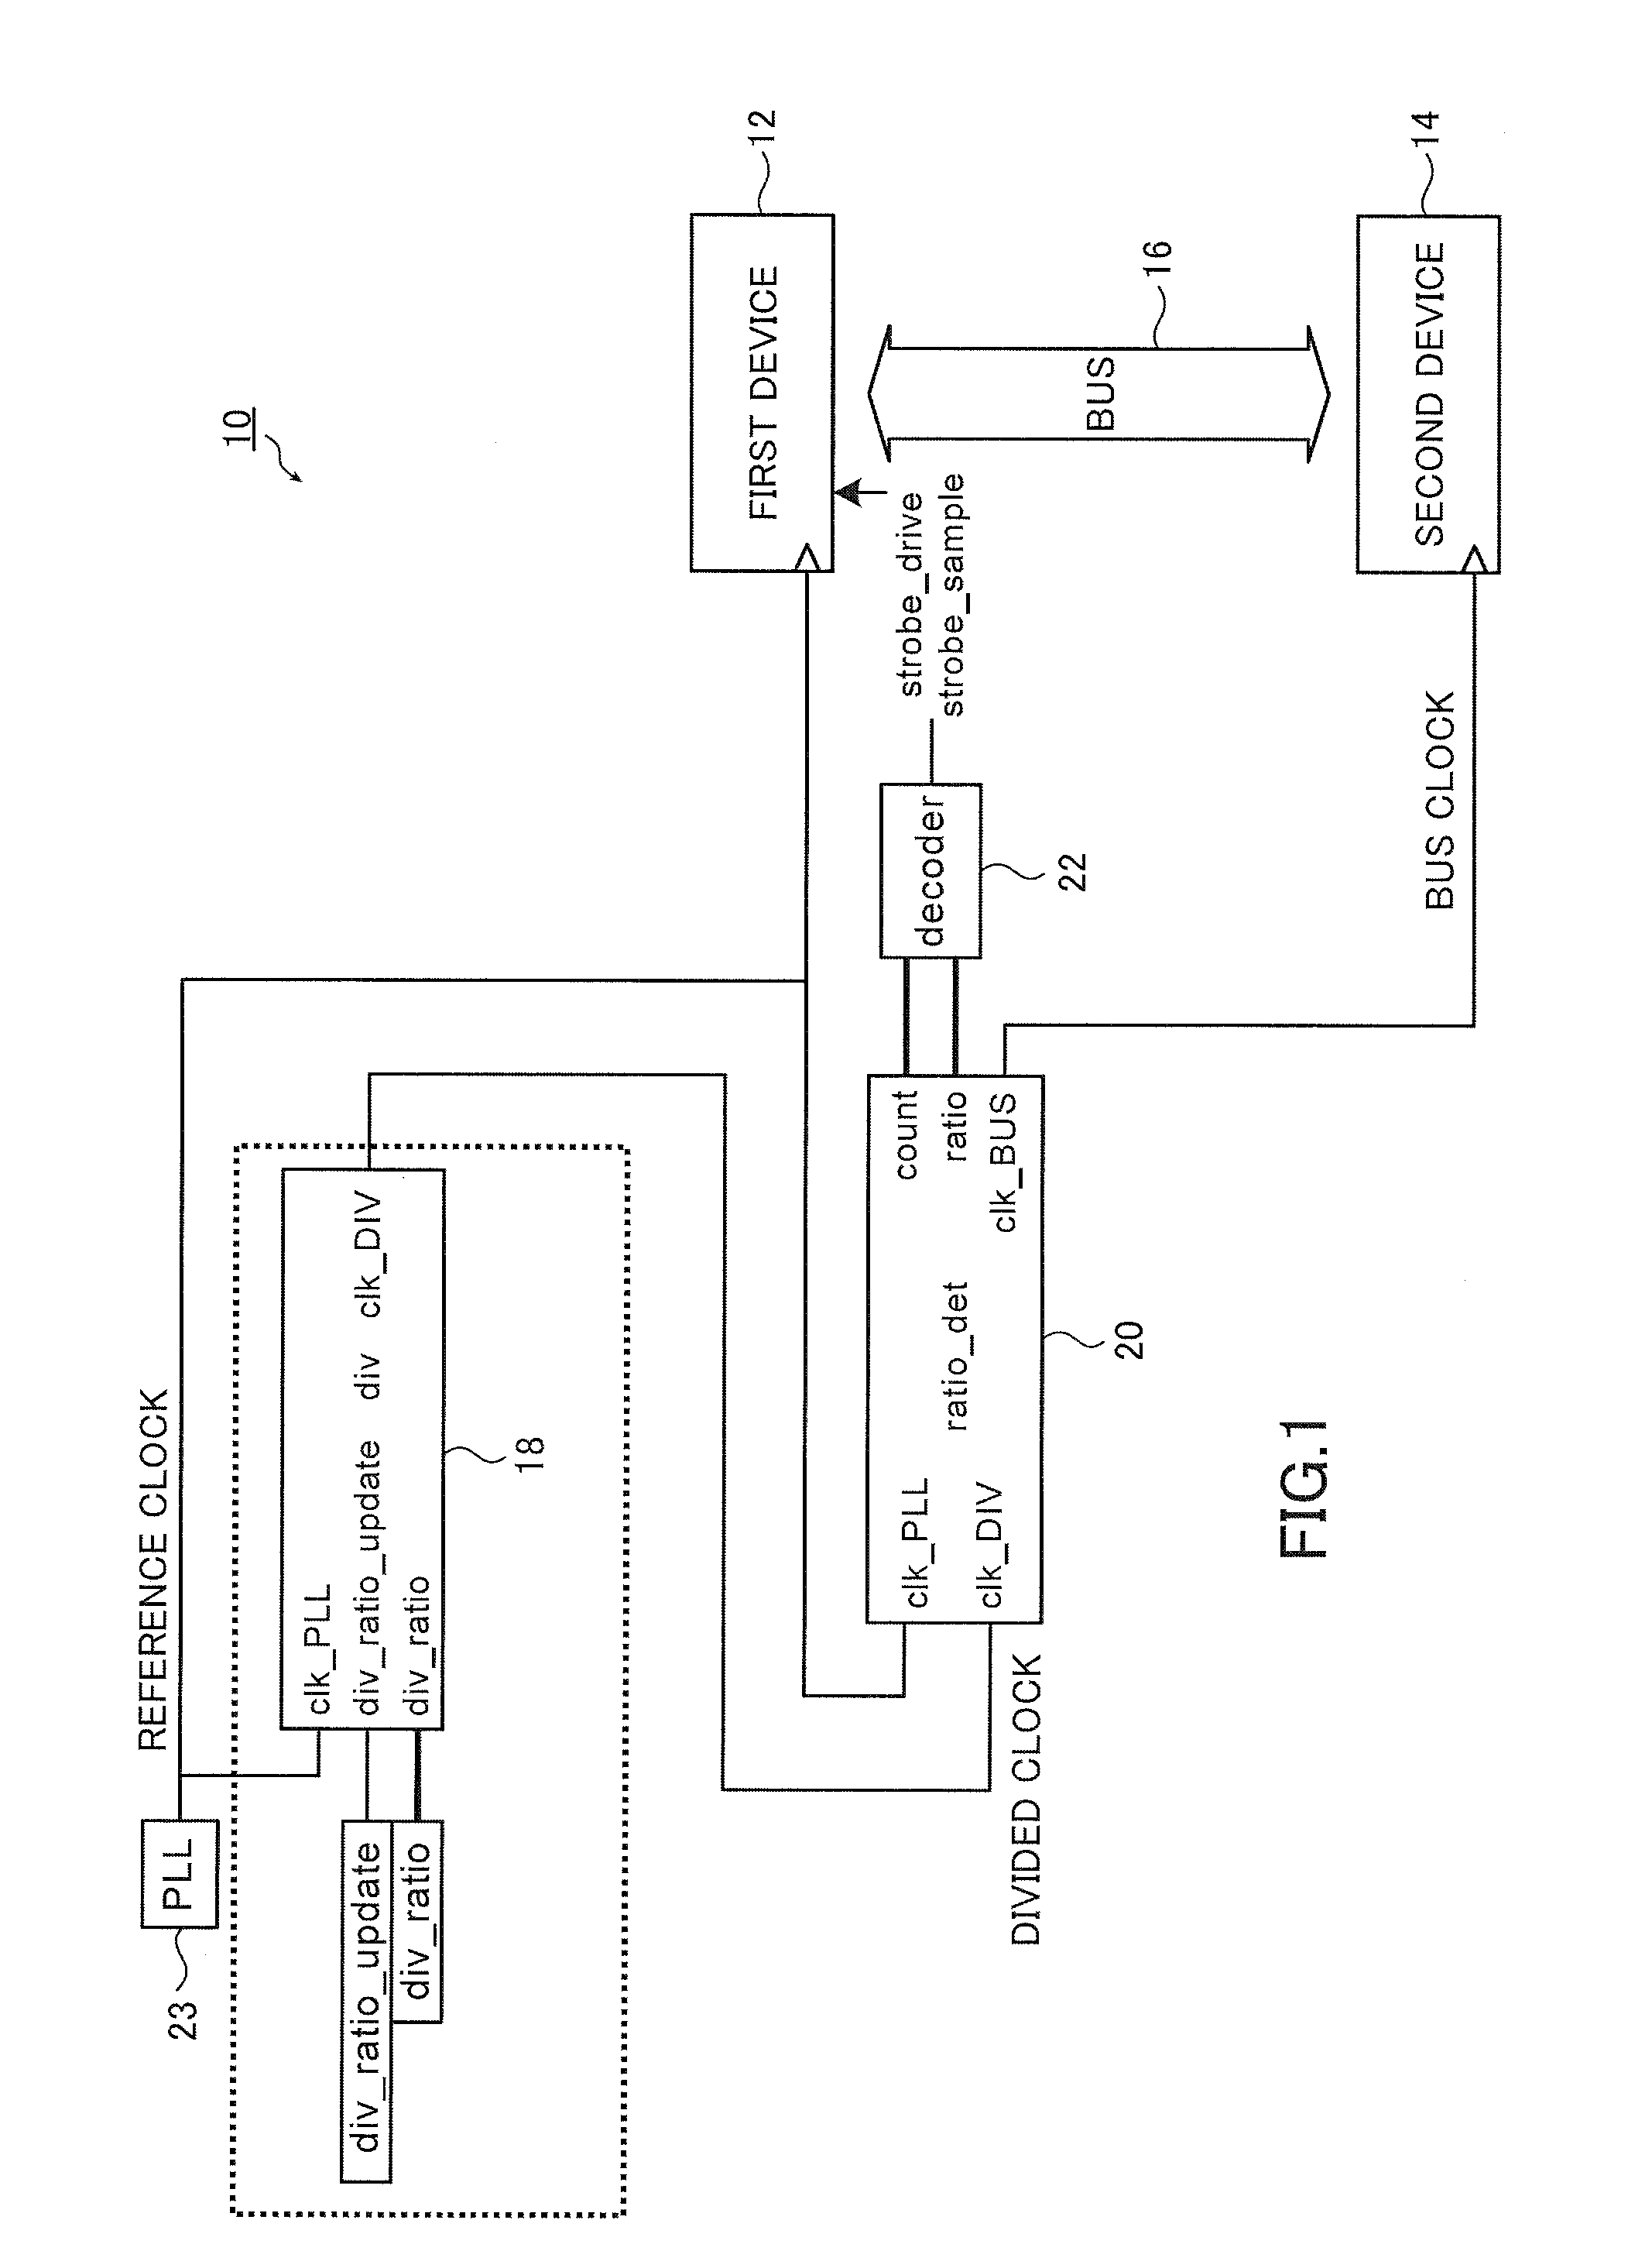 Synchronization system and frequency divider circuit